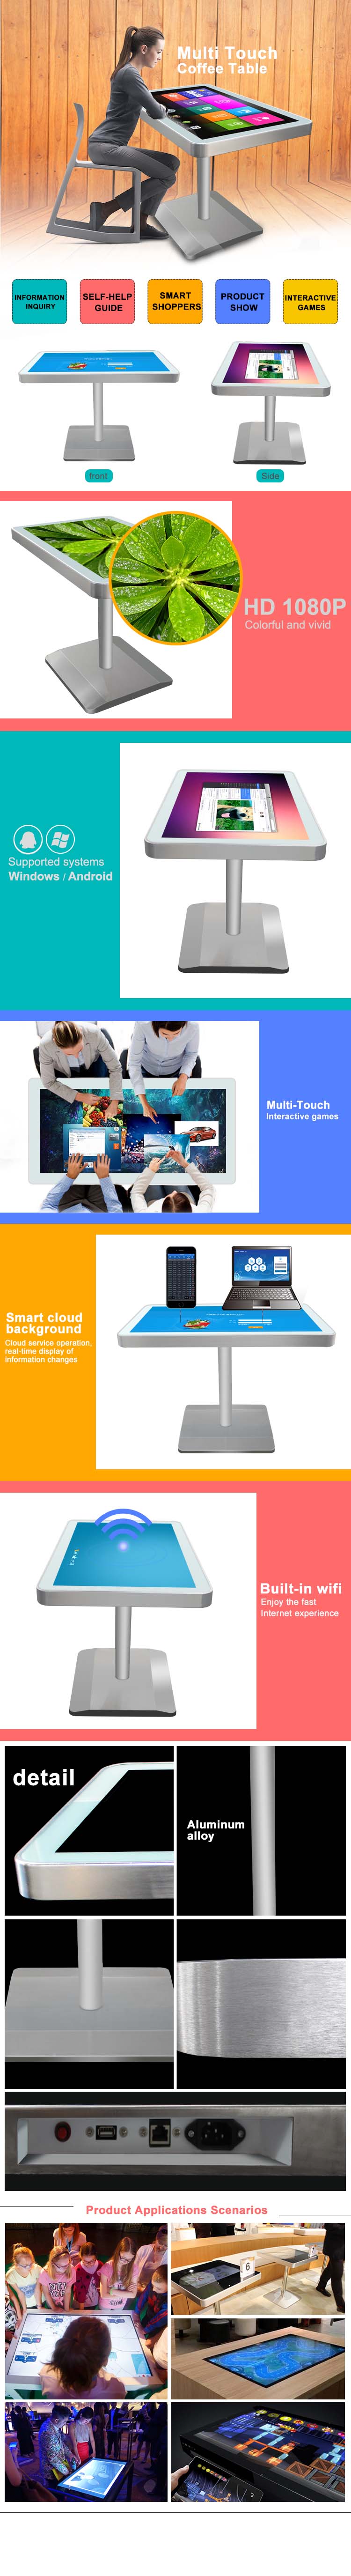 Model Number: MWE630 Waterproof Multi Touch Display Table With USB